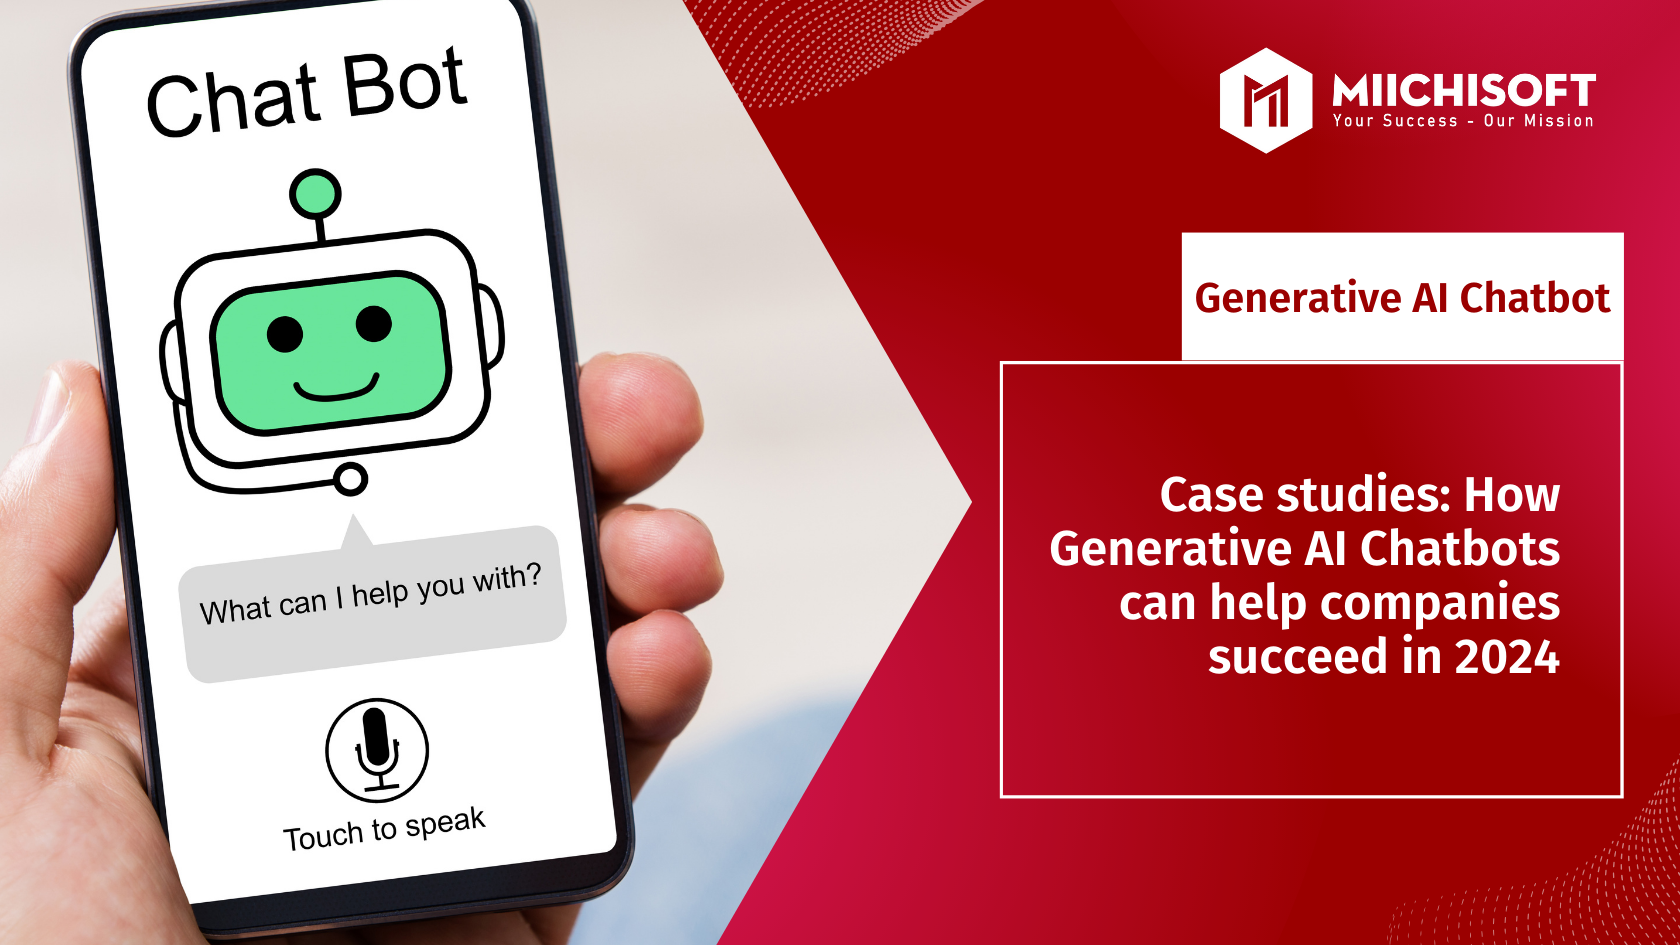 Case studies: How Generative AI Chatbots can help companies succeed in 2024